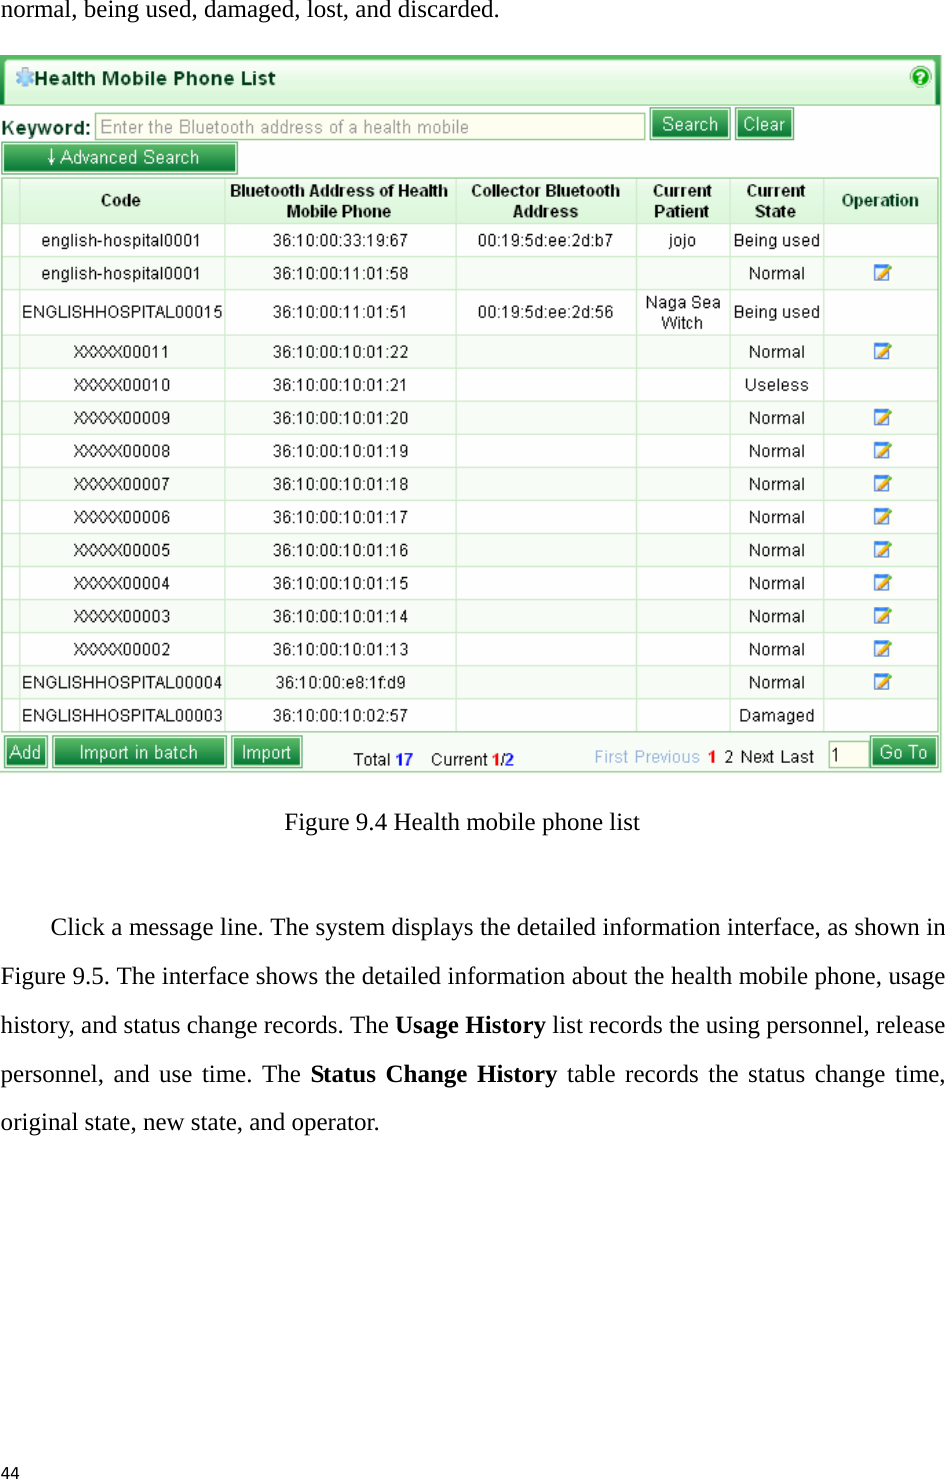 44normal, being used, damaged, lost, and discarded.    Figure 9.4 Health mobile phone list  Click a message line. The system displays the detailed information interface, as shown in Figure 9.5. The interface shows the detailed information about the health mobile phone, usage history, and status change records. The Usage History list records the using personnel, release personnel, and use time. The Status Change History table records the status change time, original state, new state, and operator.   